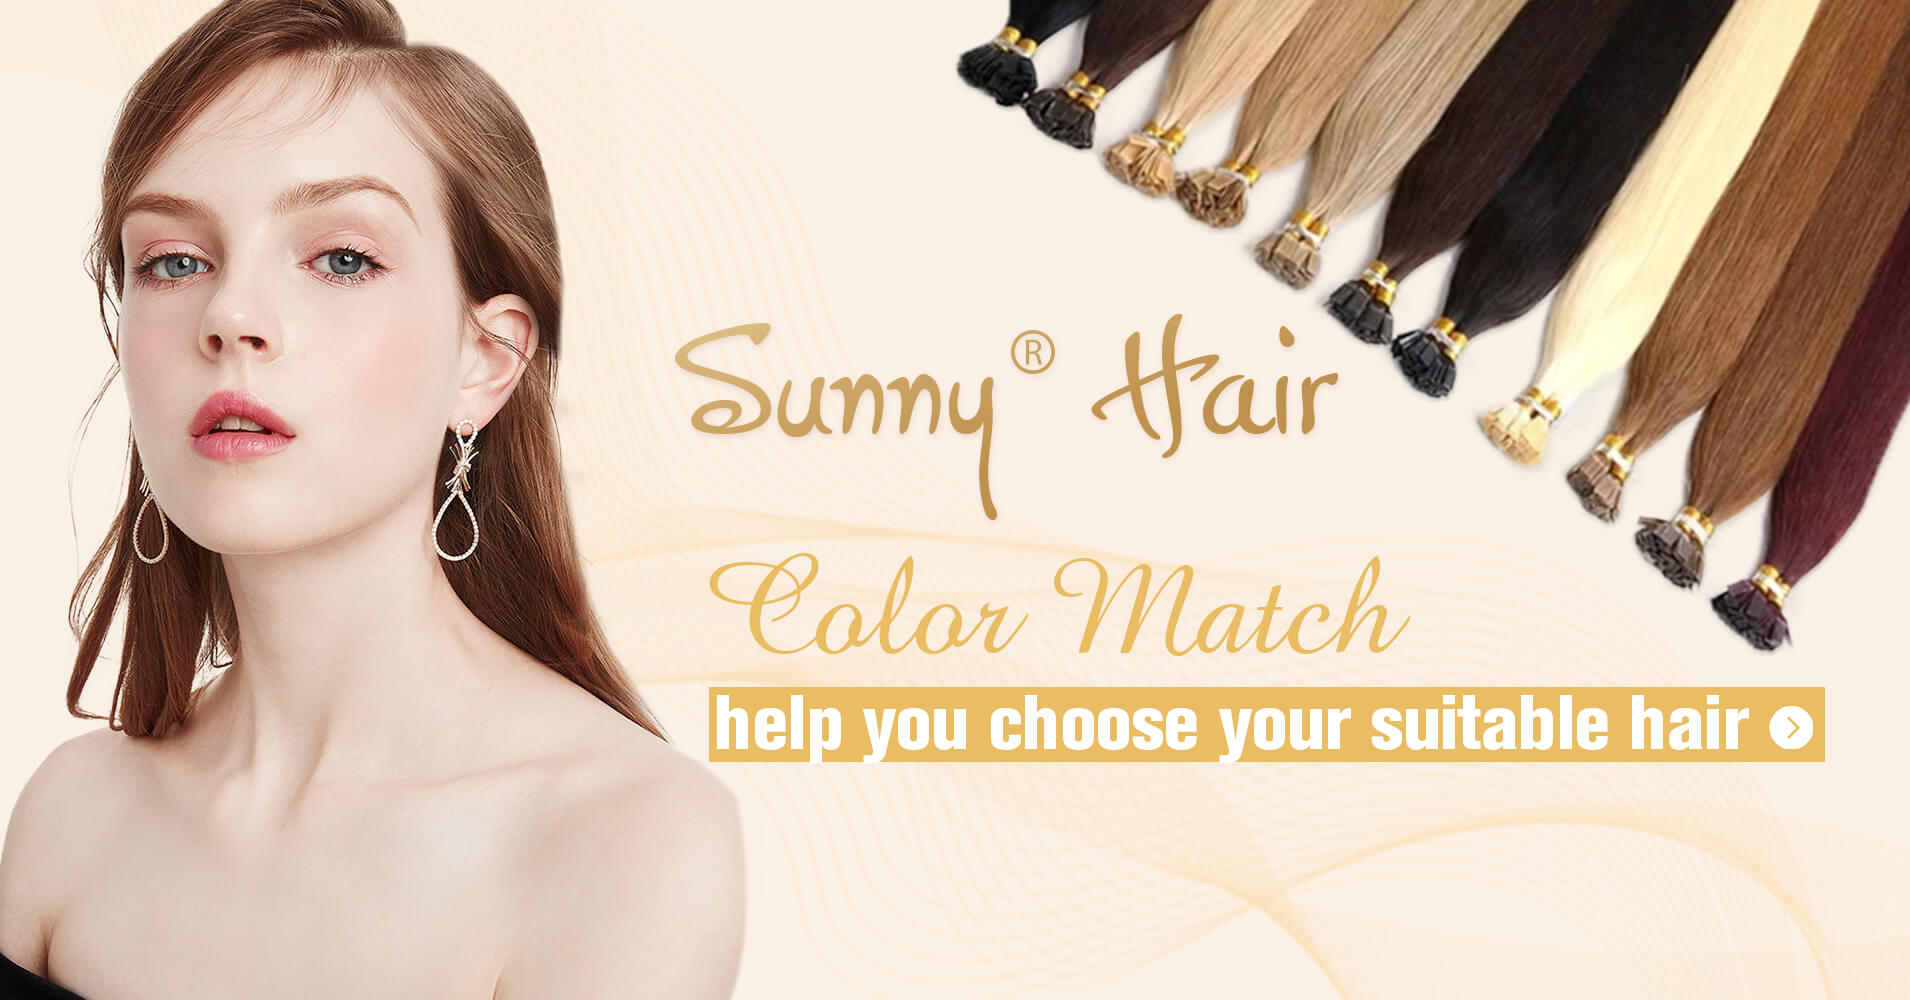 Ponytail human hair extensions Sunny hair provide customer color match